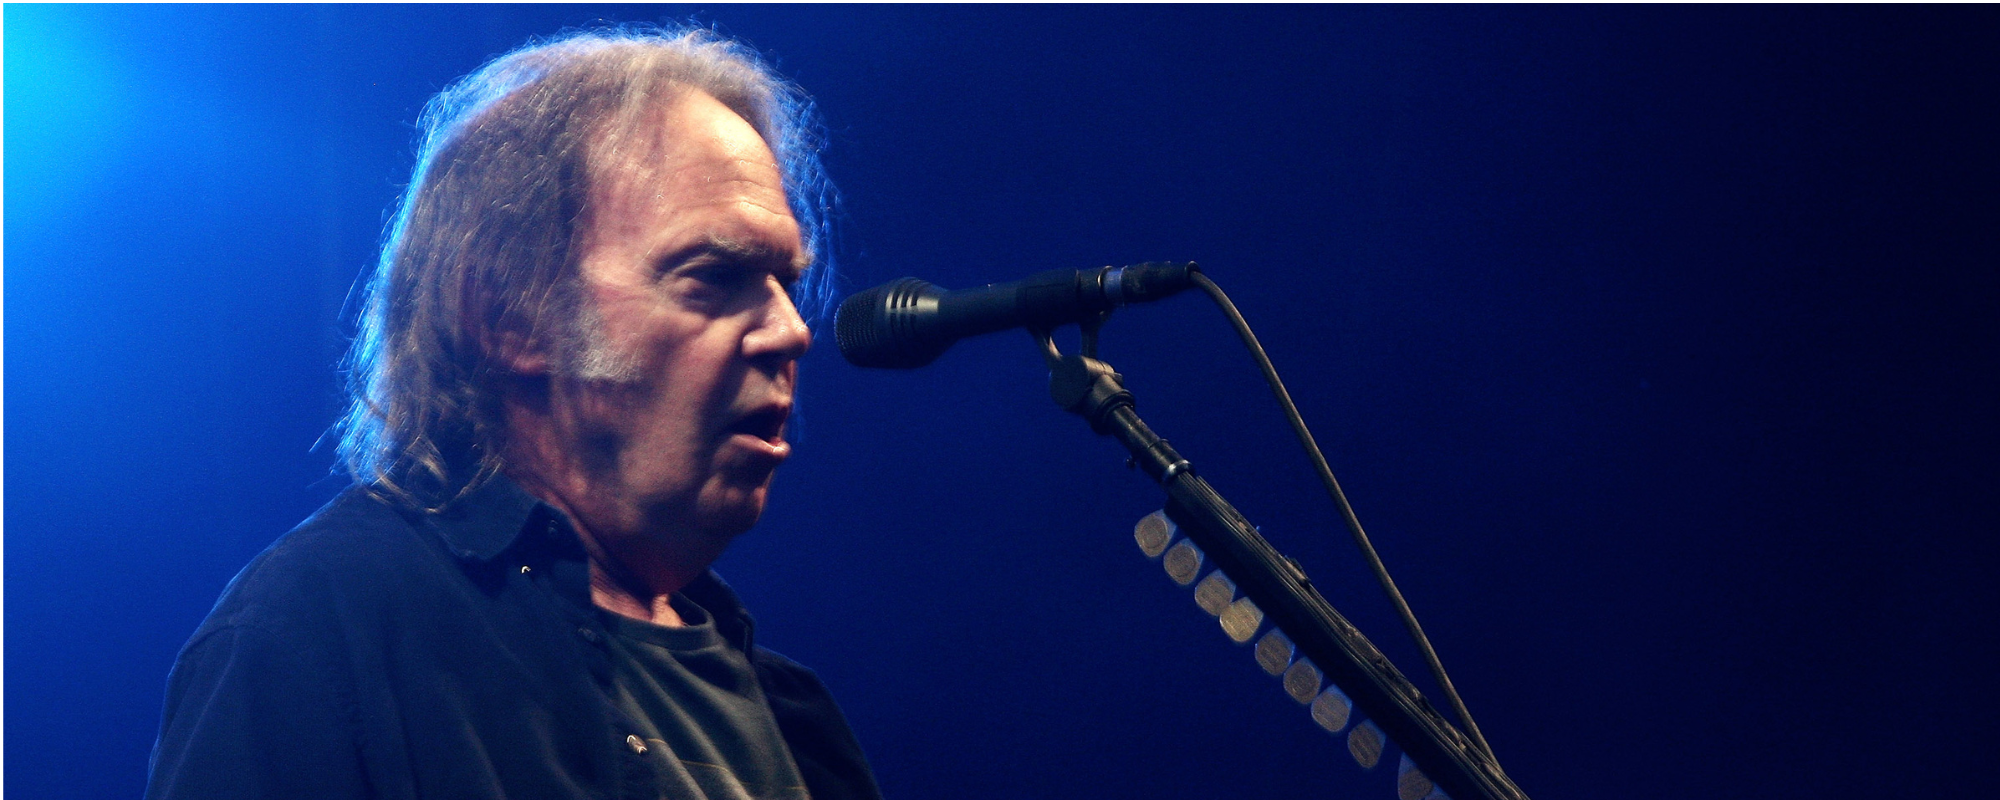 Neil Young “Stopping All Use of X” After Owner Elon Musk’s Alleged Anti-Semitic Comments